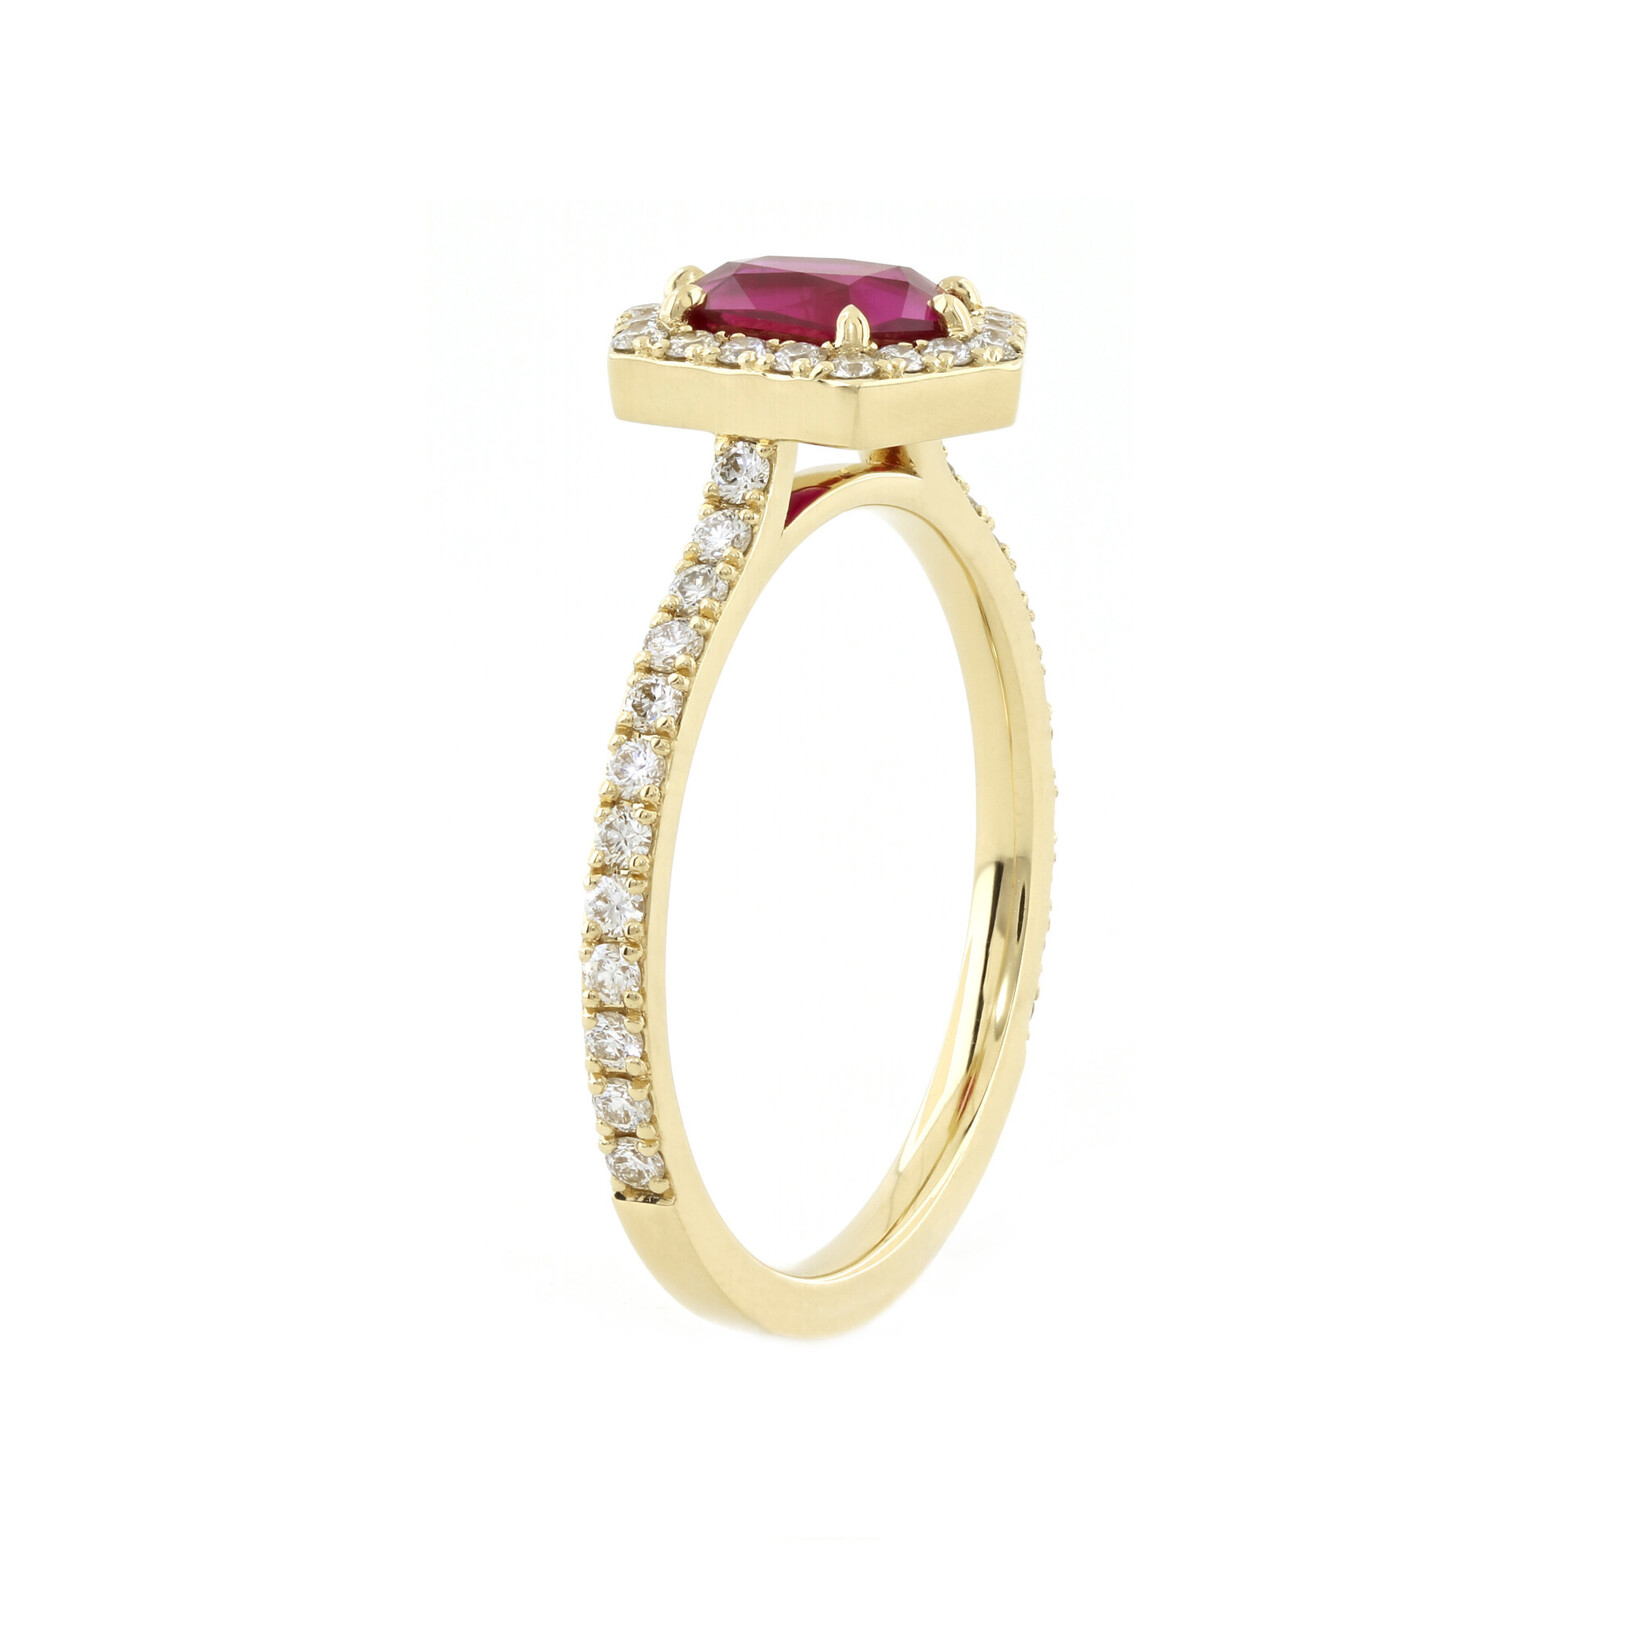 Baxter Moerman Kinsley Ring with Ruby Shield